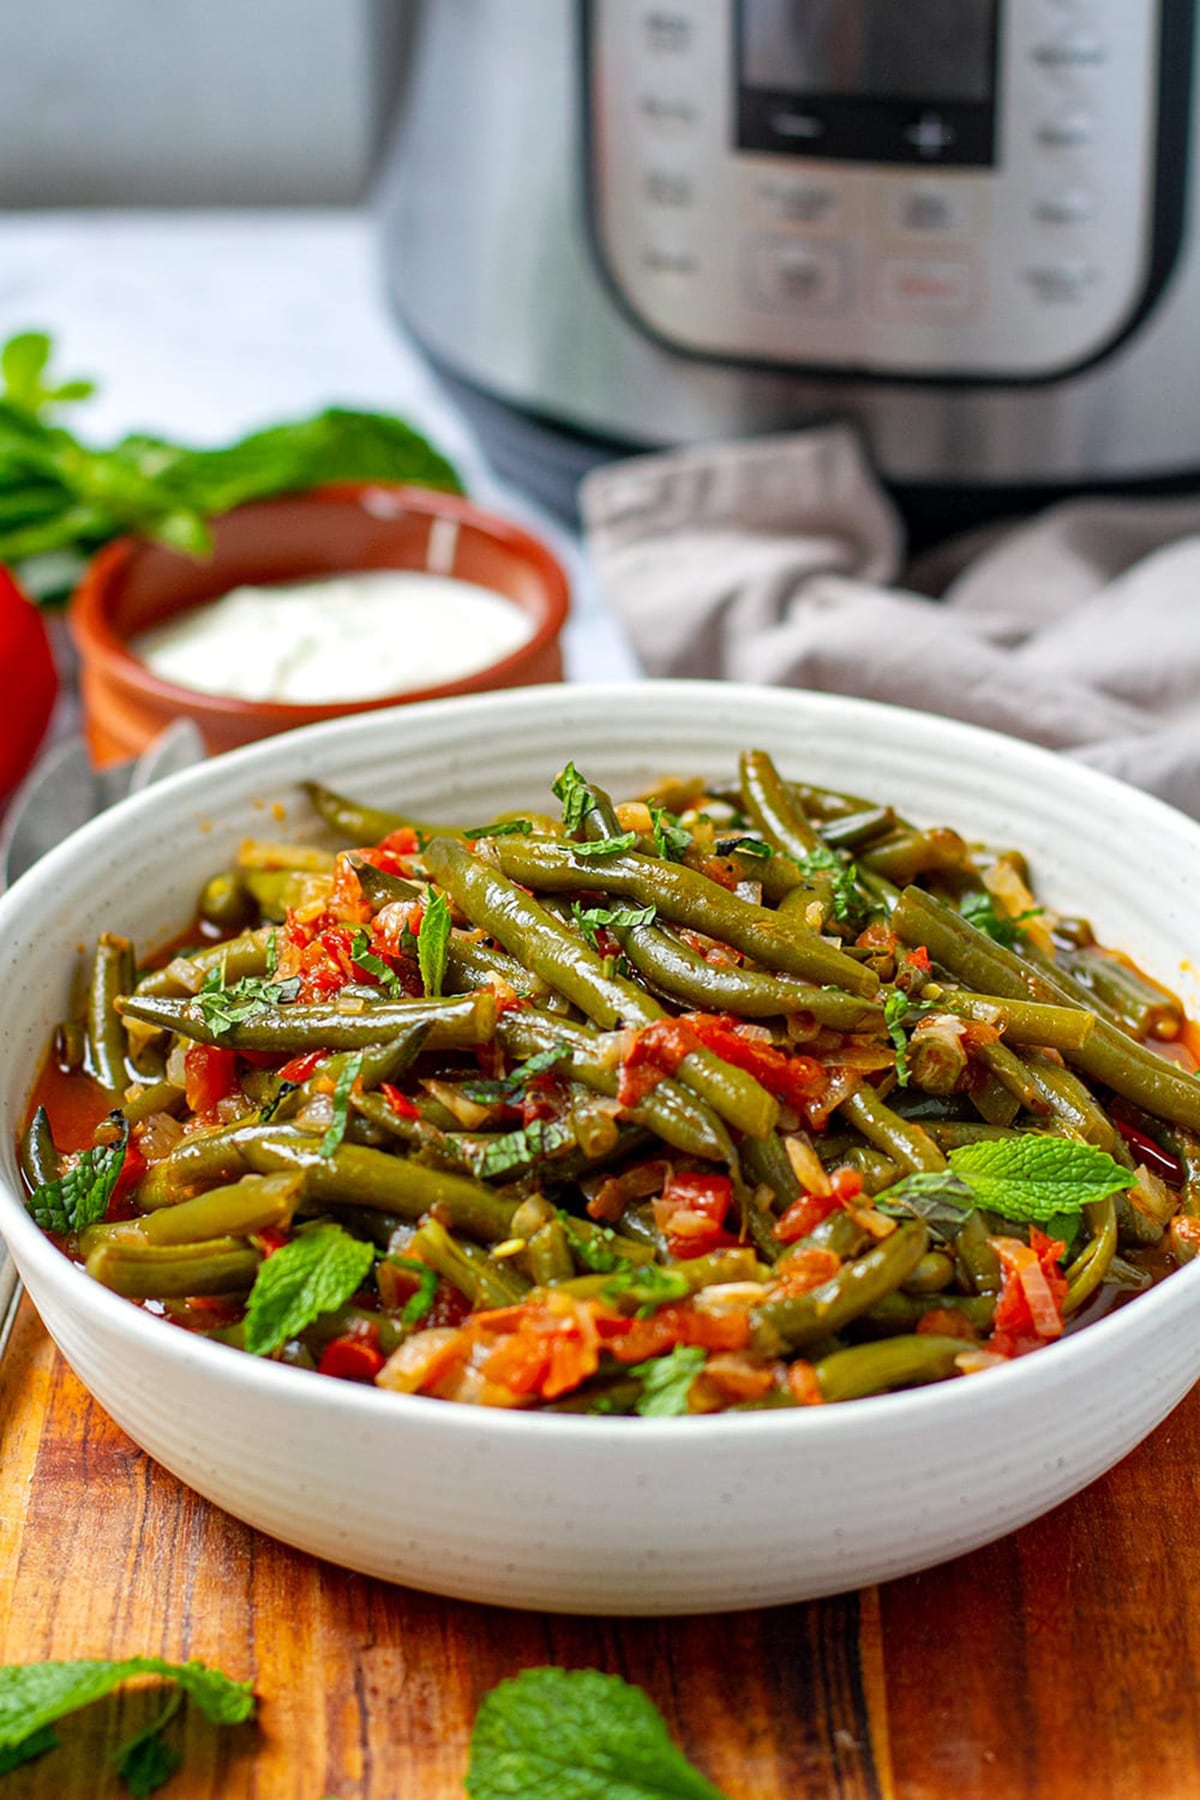 Braised Green Beans With Tomatoes